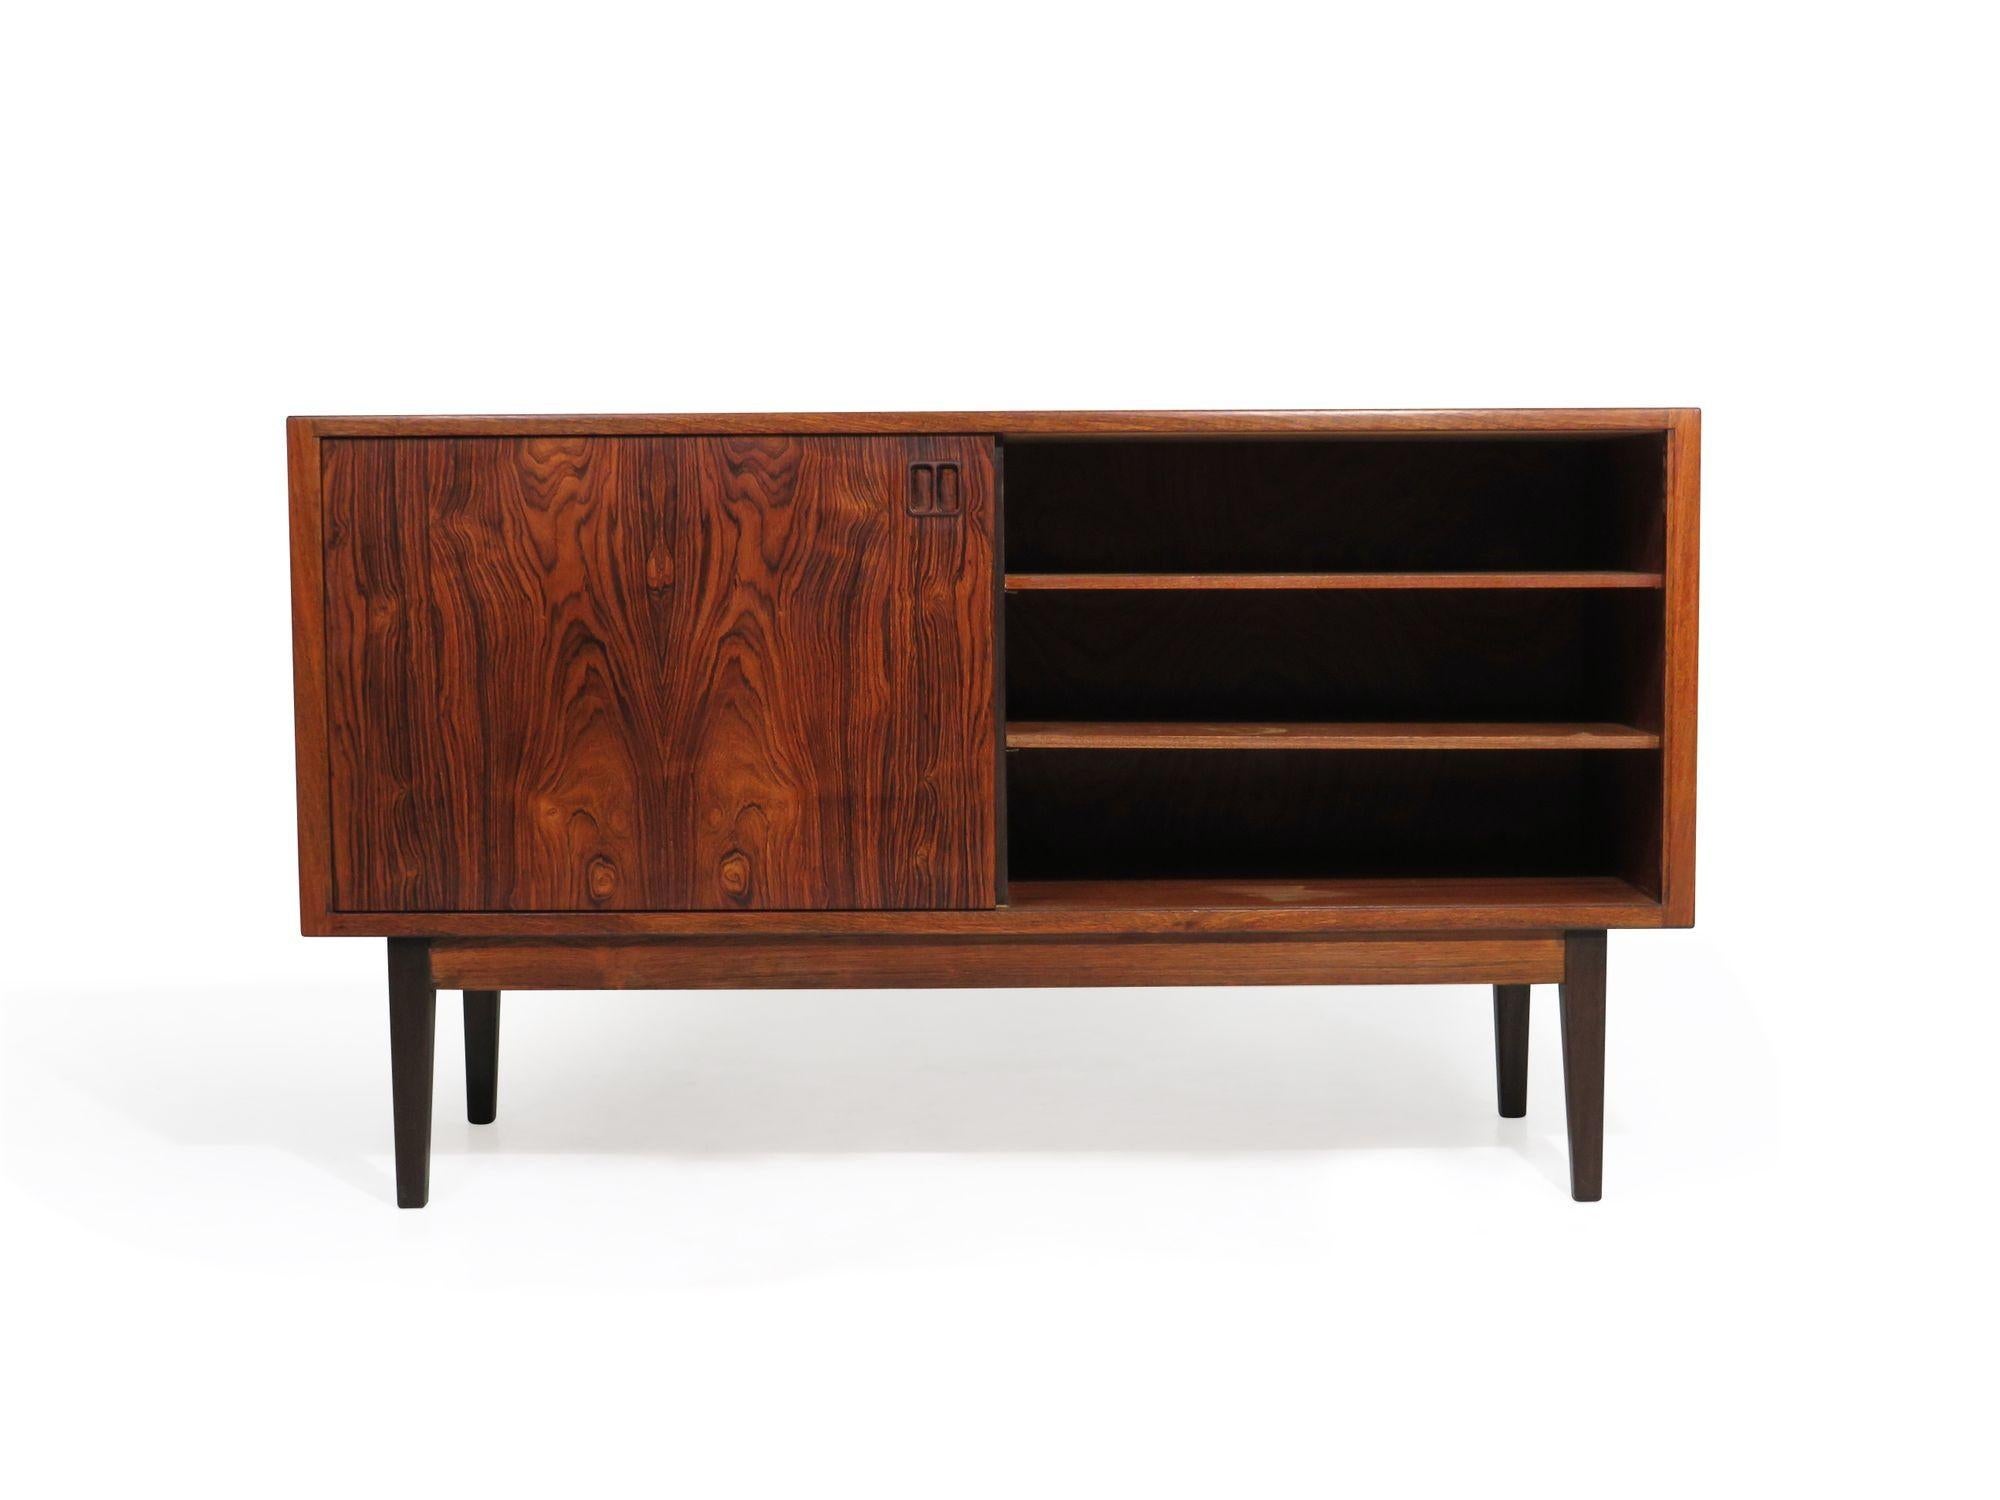 Danish Brazilian Rosewood credenza with book-matched sliding door and four drawers with carved pulls. Professionally restored by our team of in-house craftspeople.